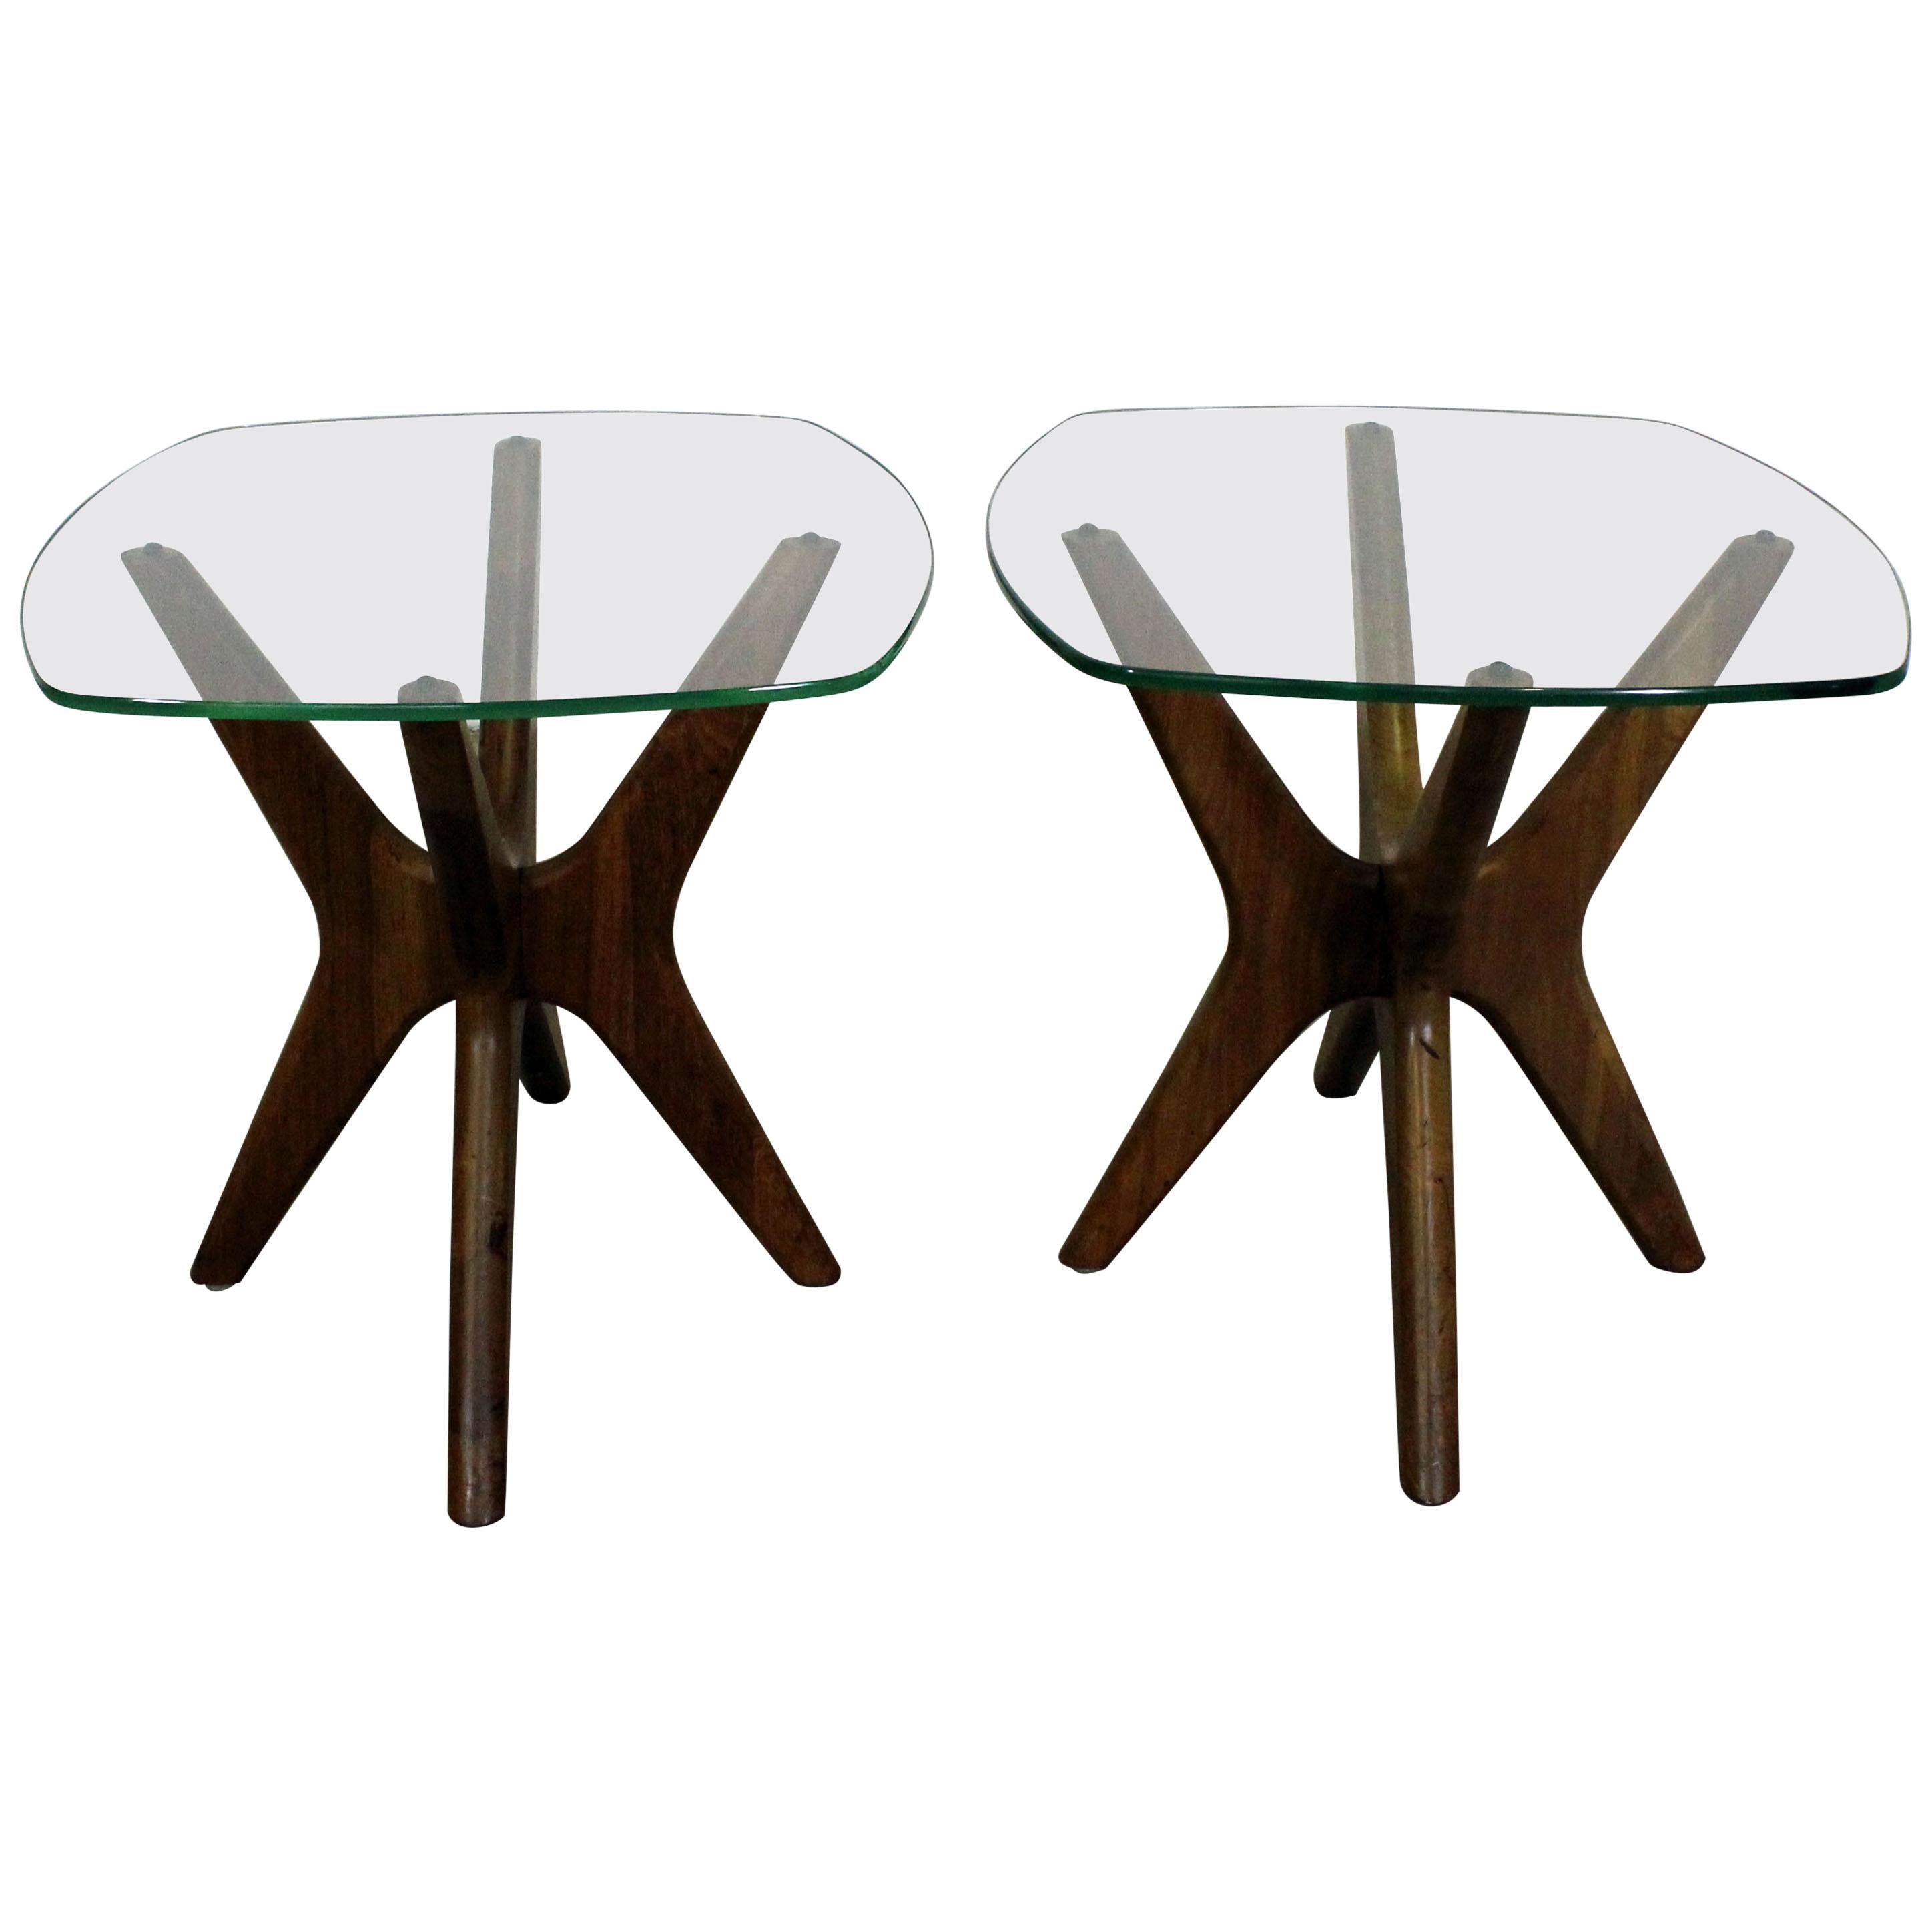 Pair of Mid-Century Modern Adrian Pearsall 'Jacks' Glass Top End Tables